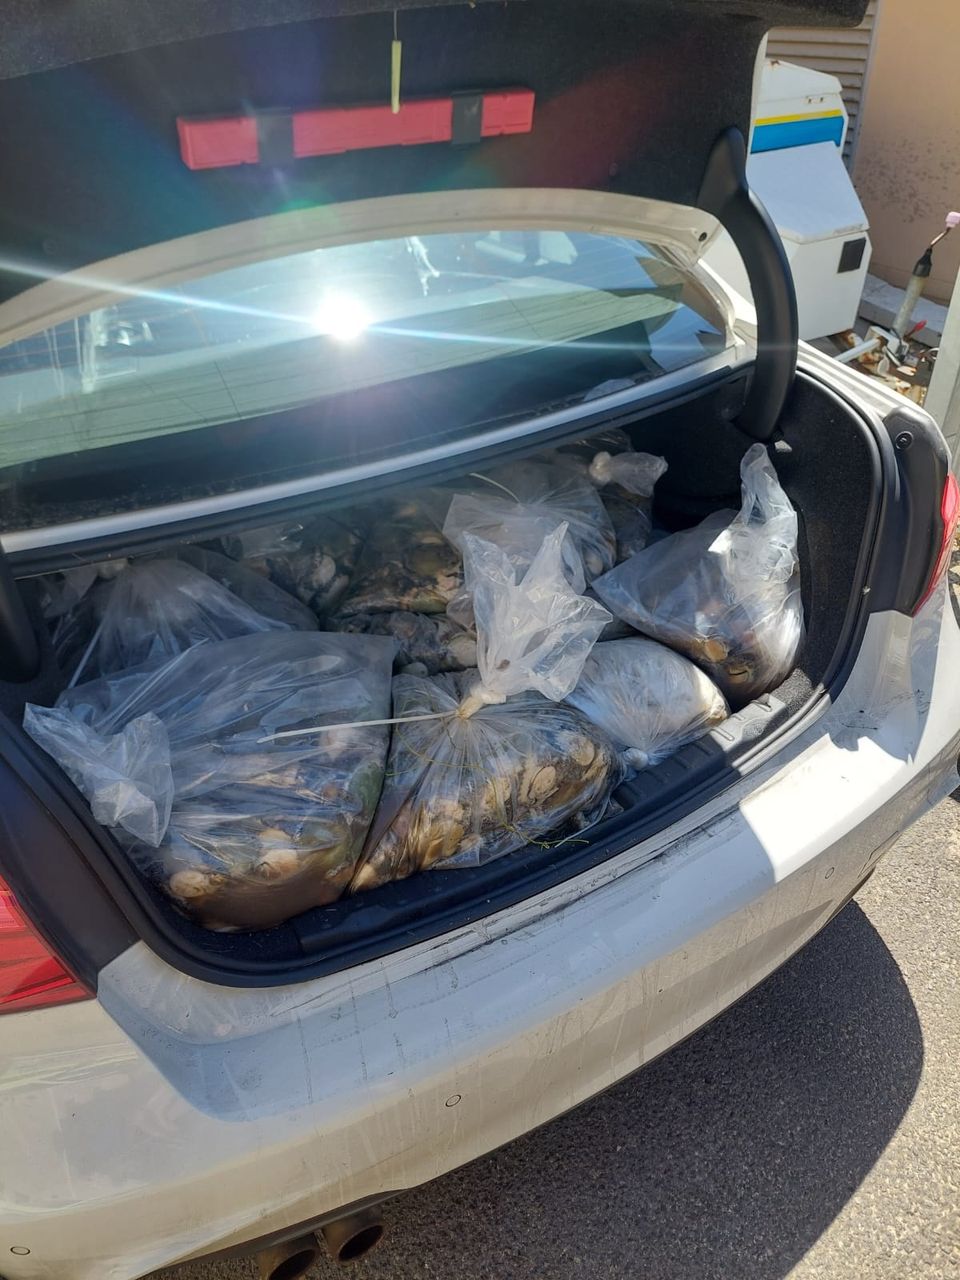 Police seize abalone worth more than R500 000